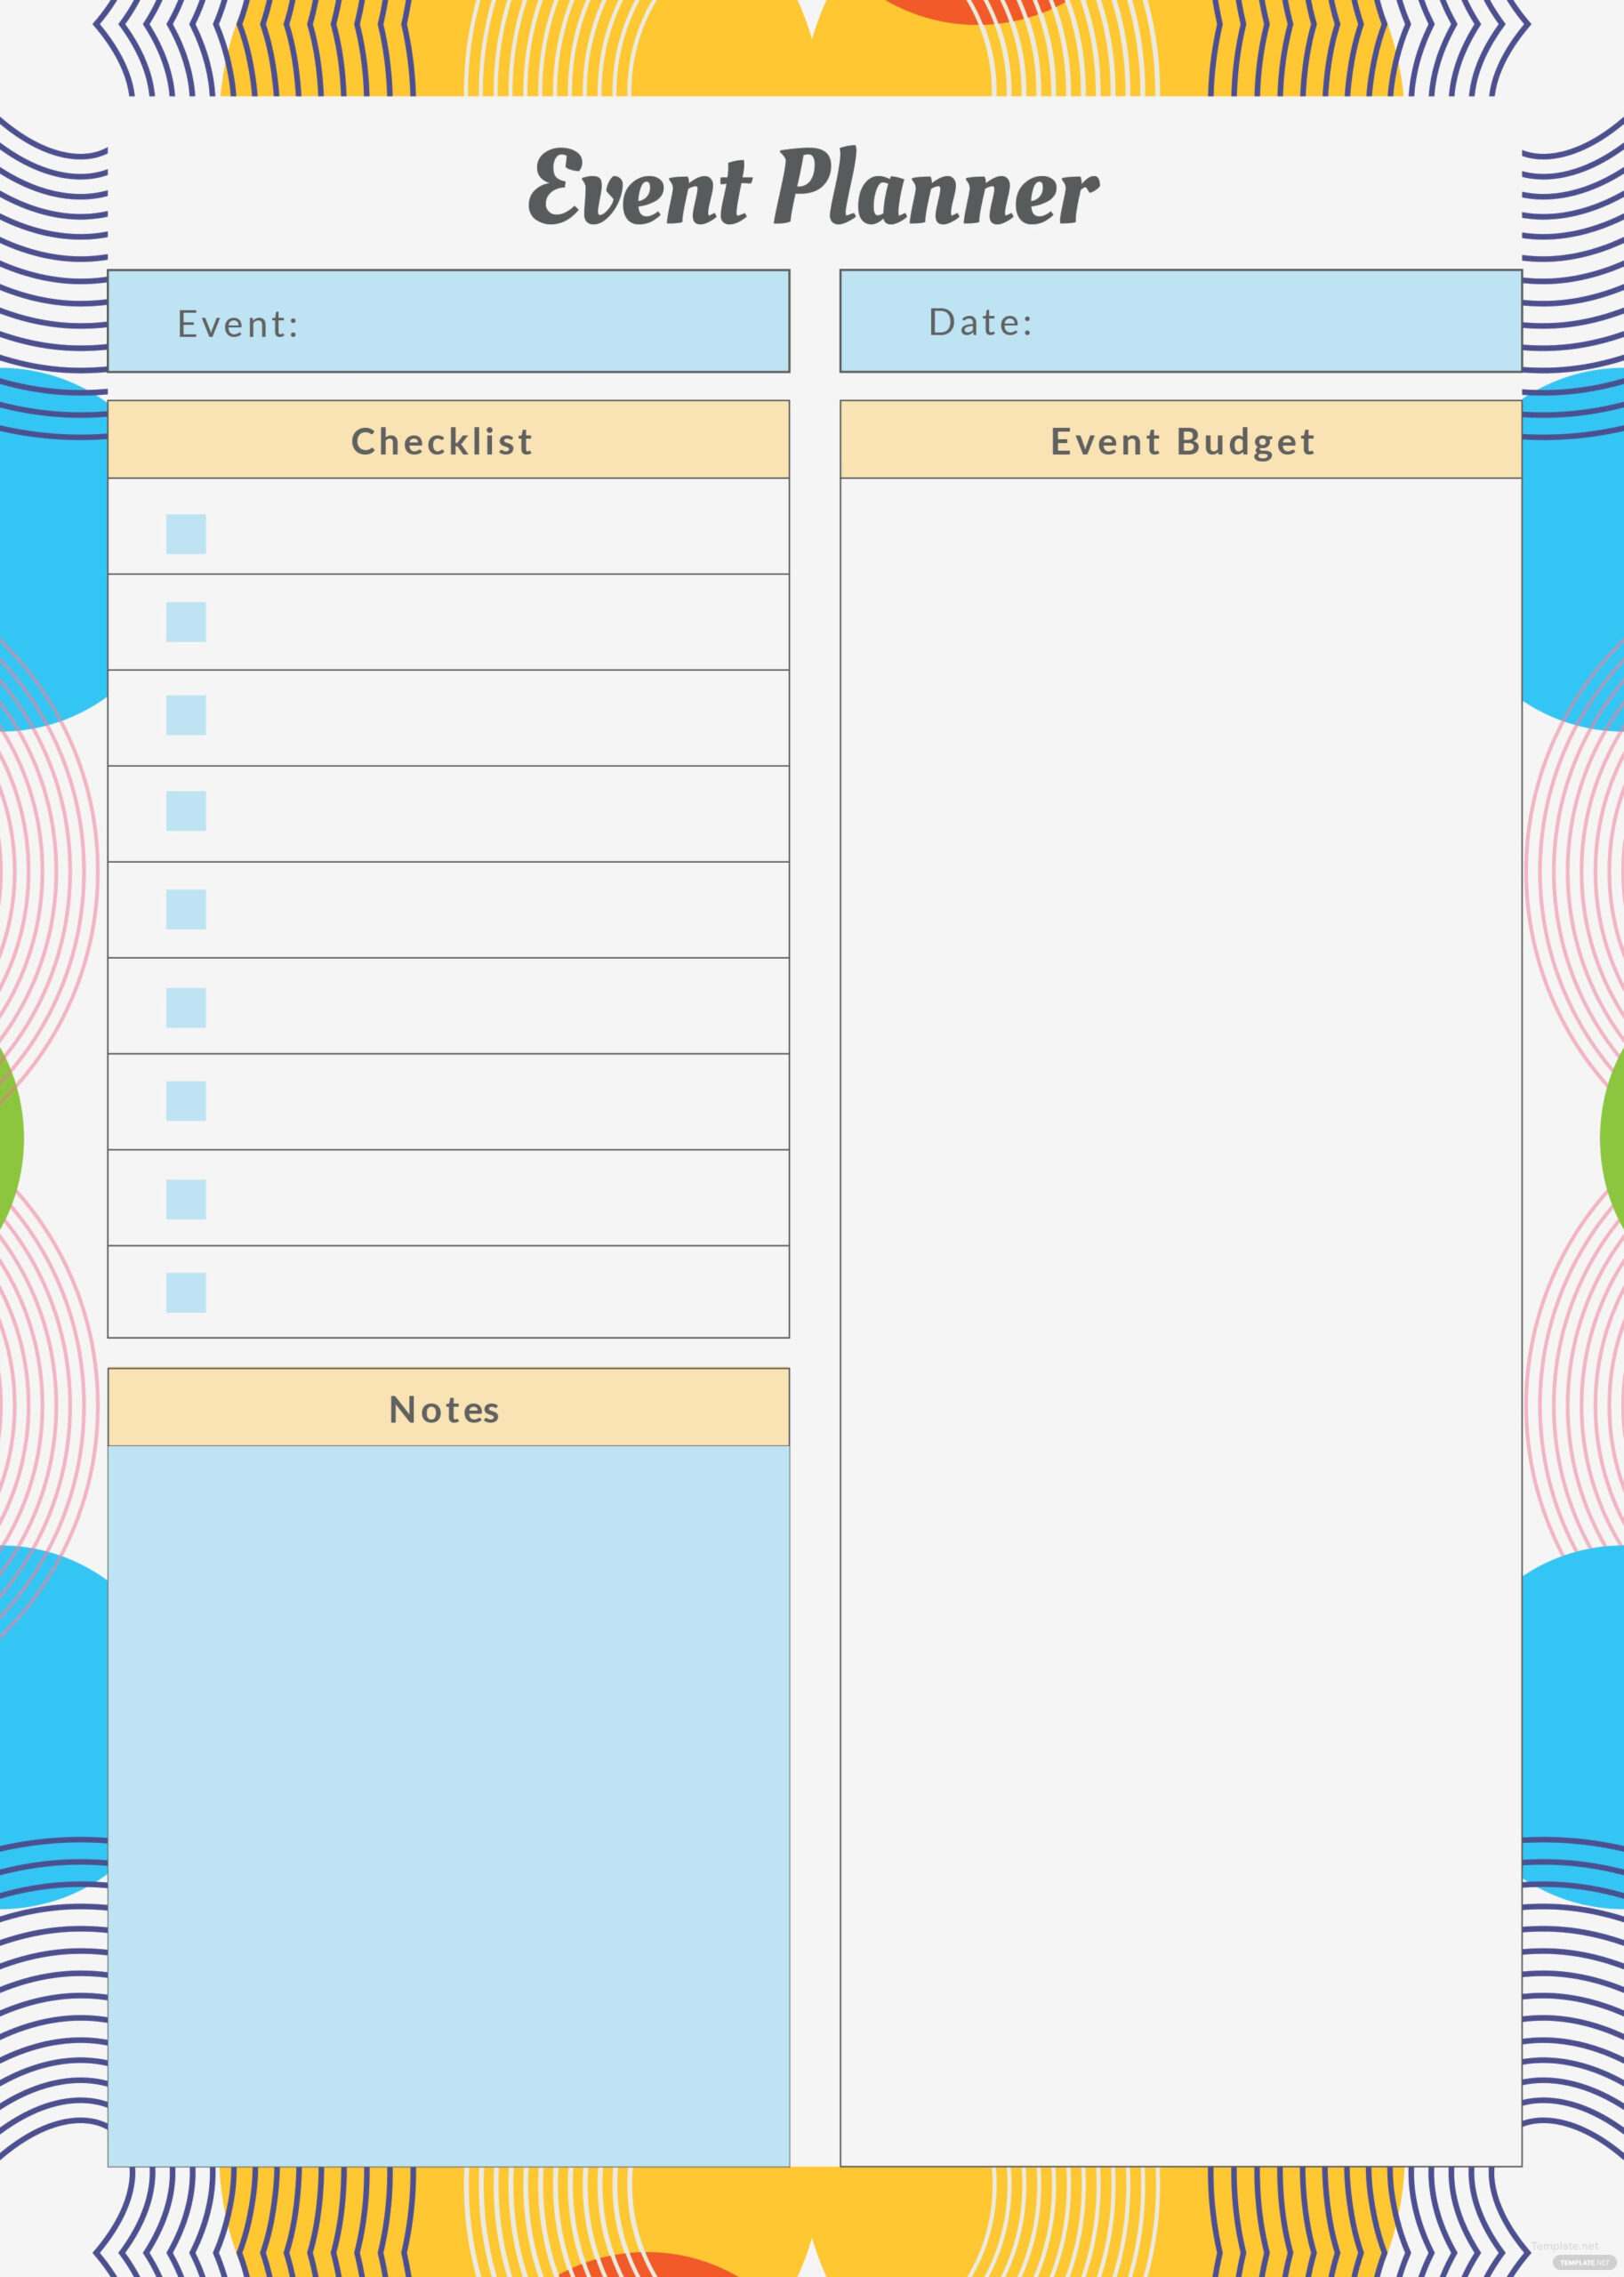 Free Event Planner Template In Adobe Photoshop Illustrator InDesign